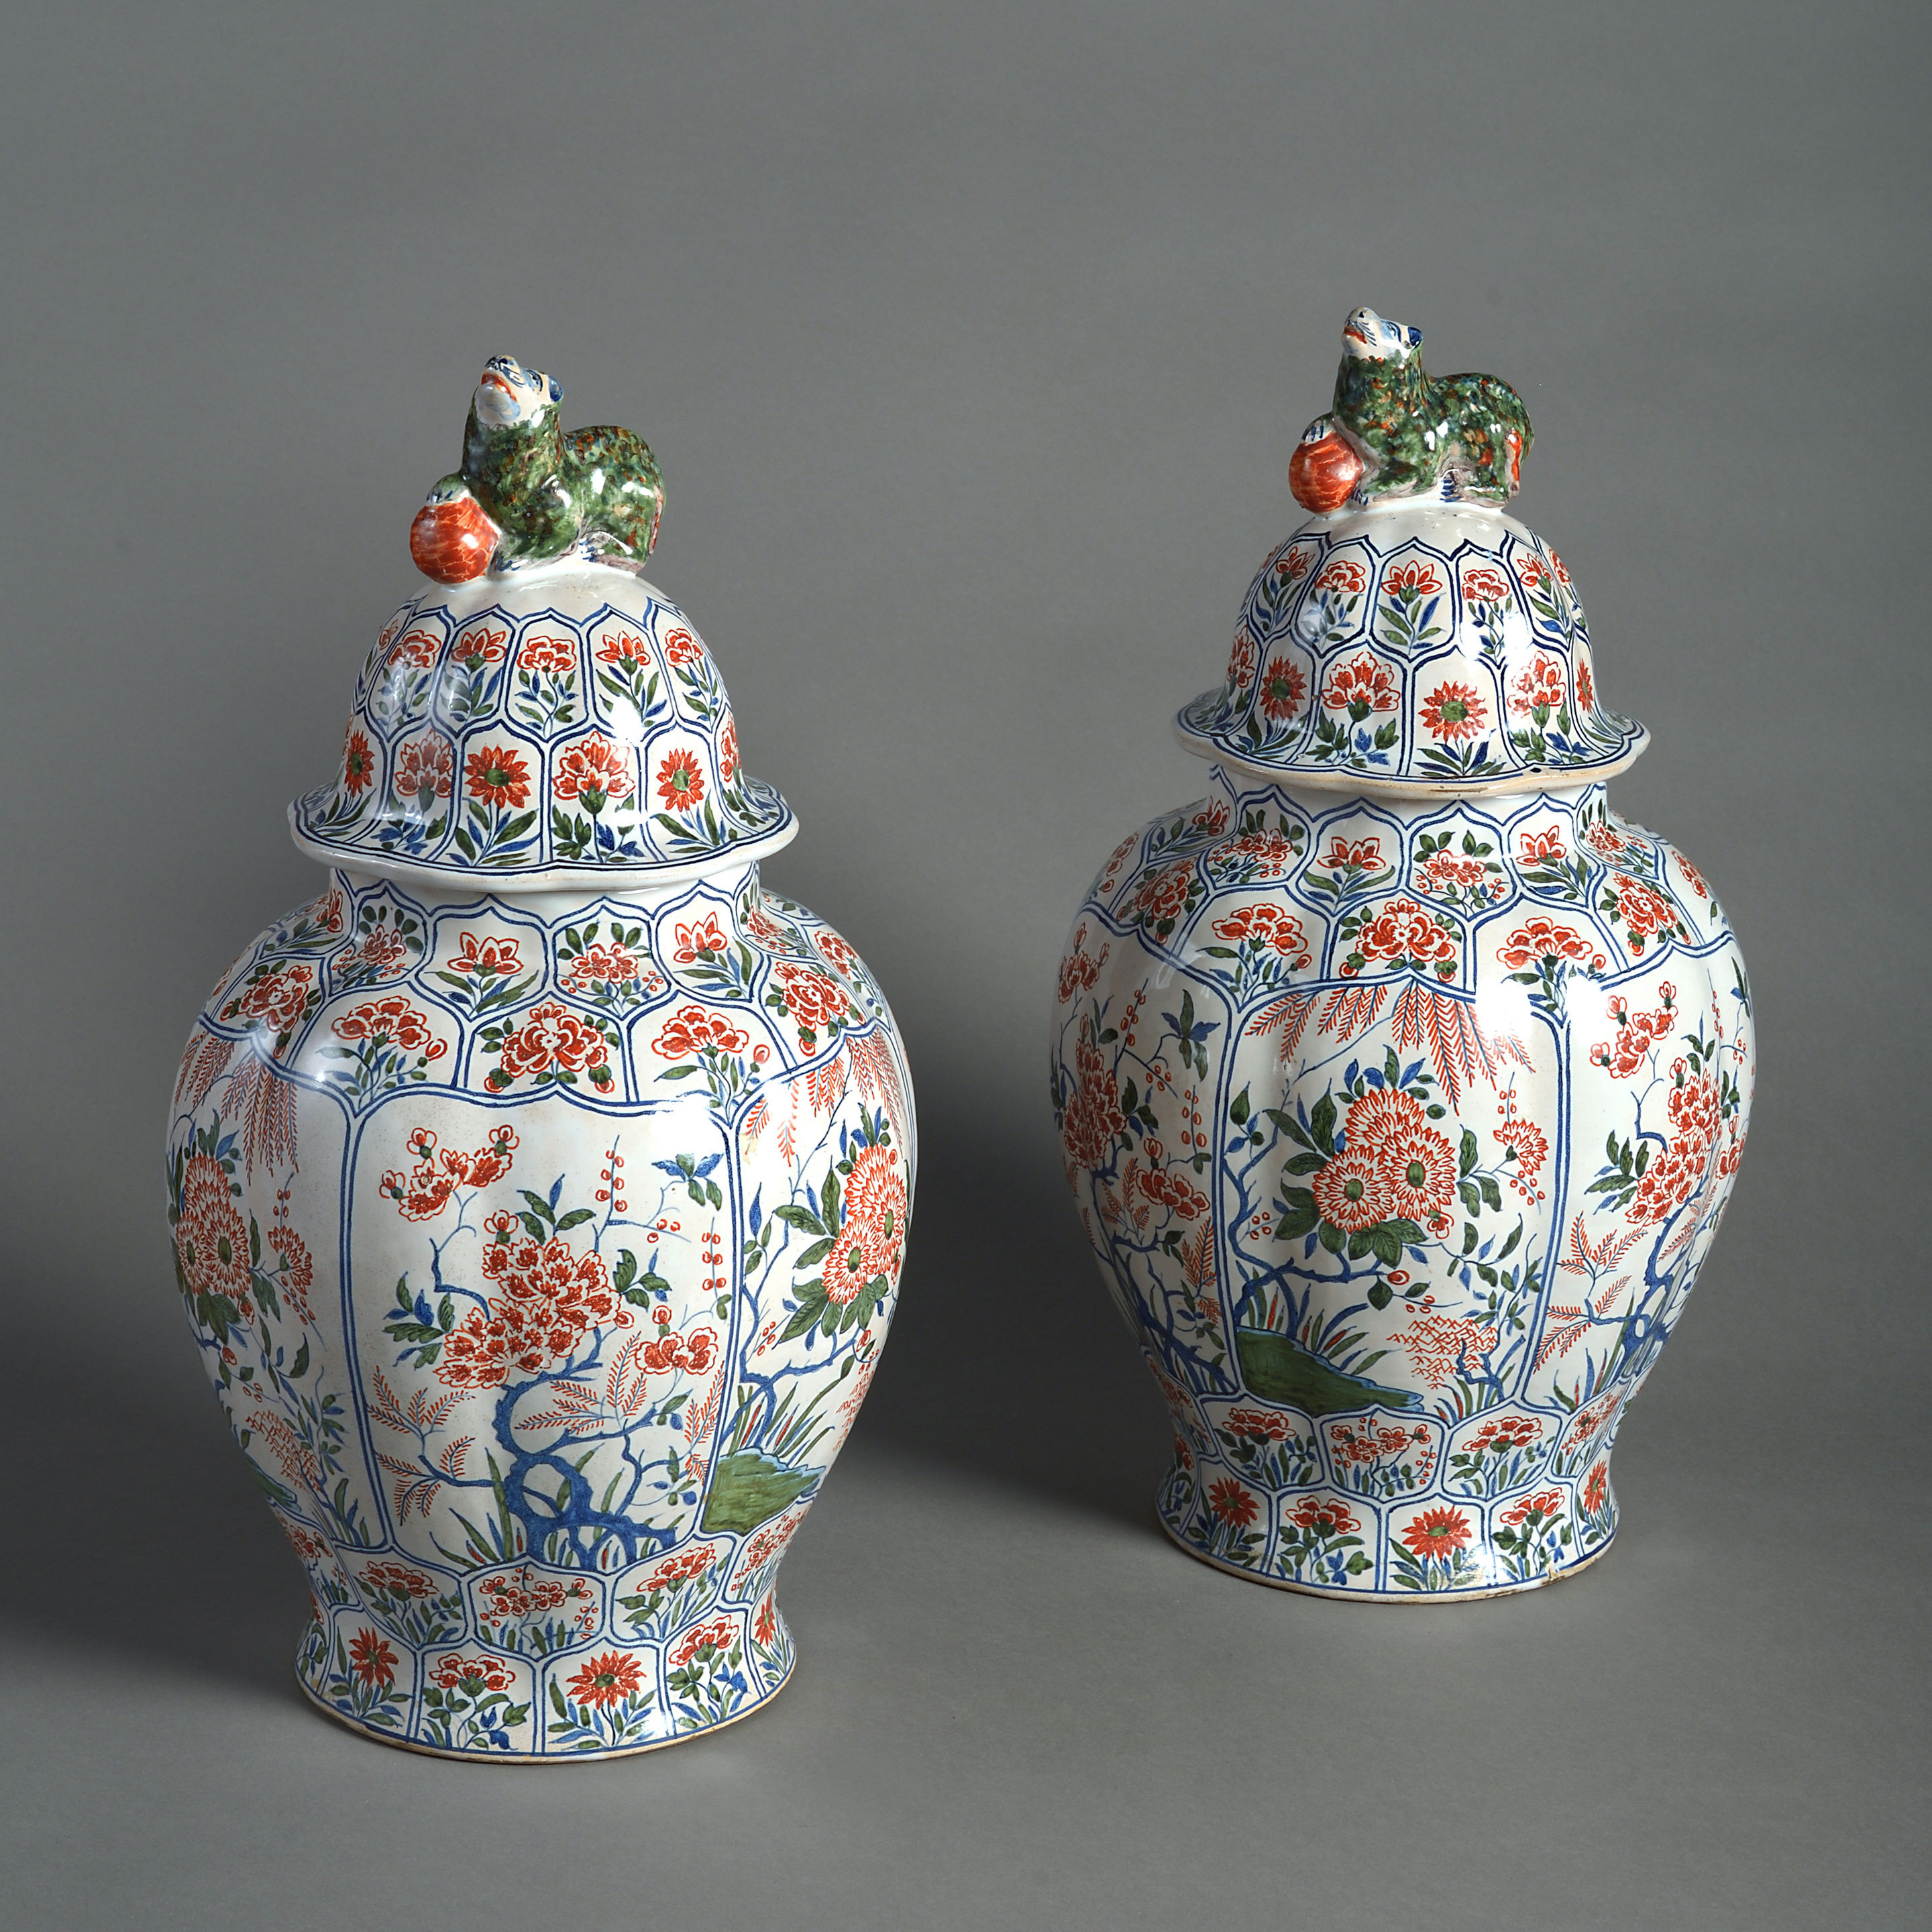 17 Great Large White Pottery Vase 2024 free download large white pottery vase of late 19th century pair of faience pottery vases timothy langston inside late 19th century pair of faience pottery vases